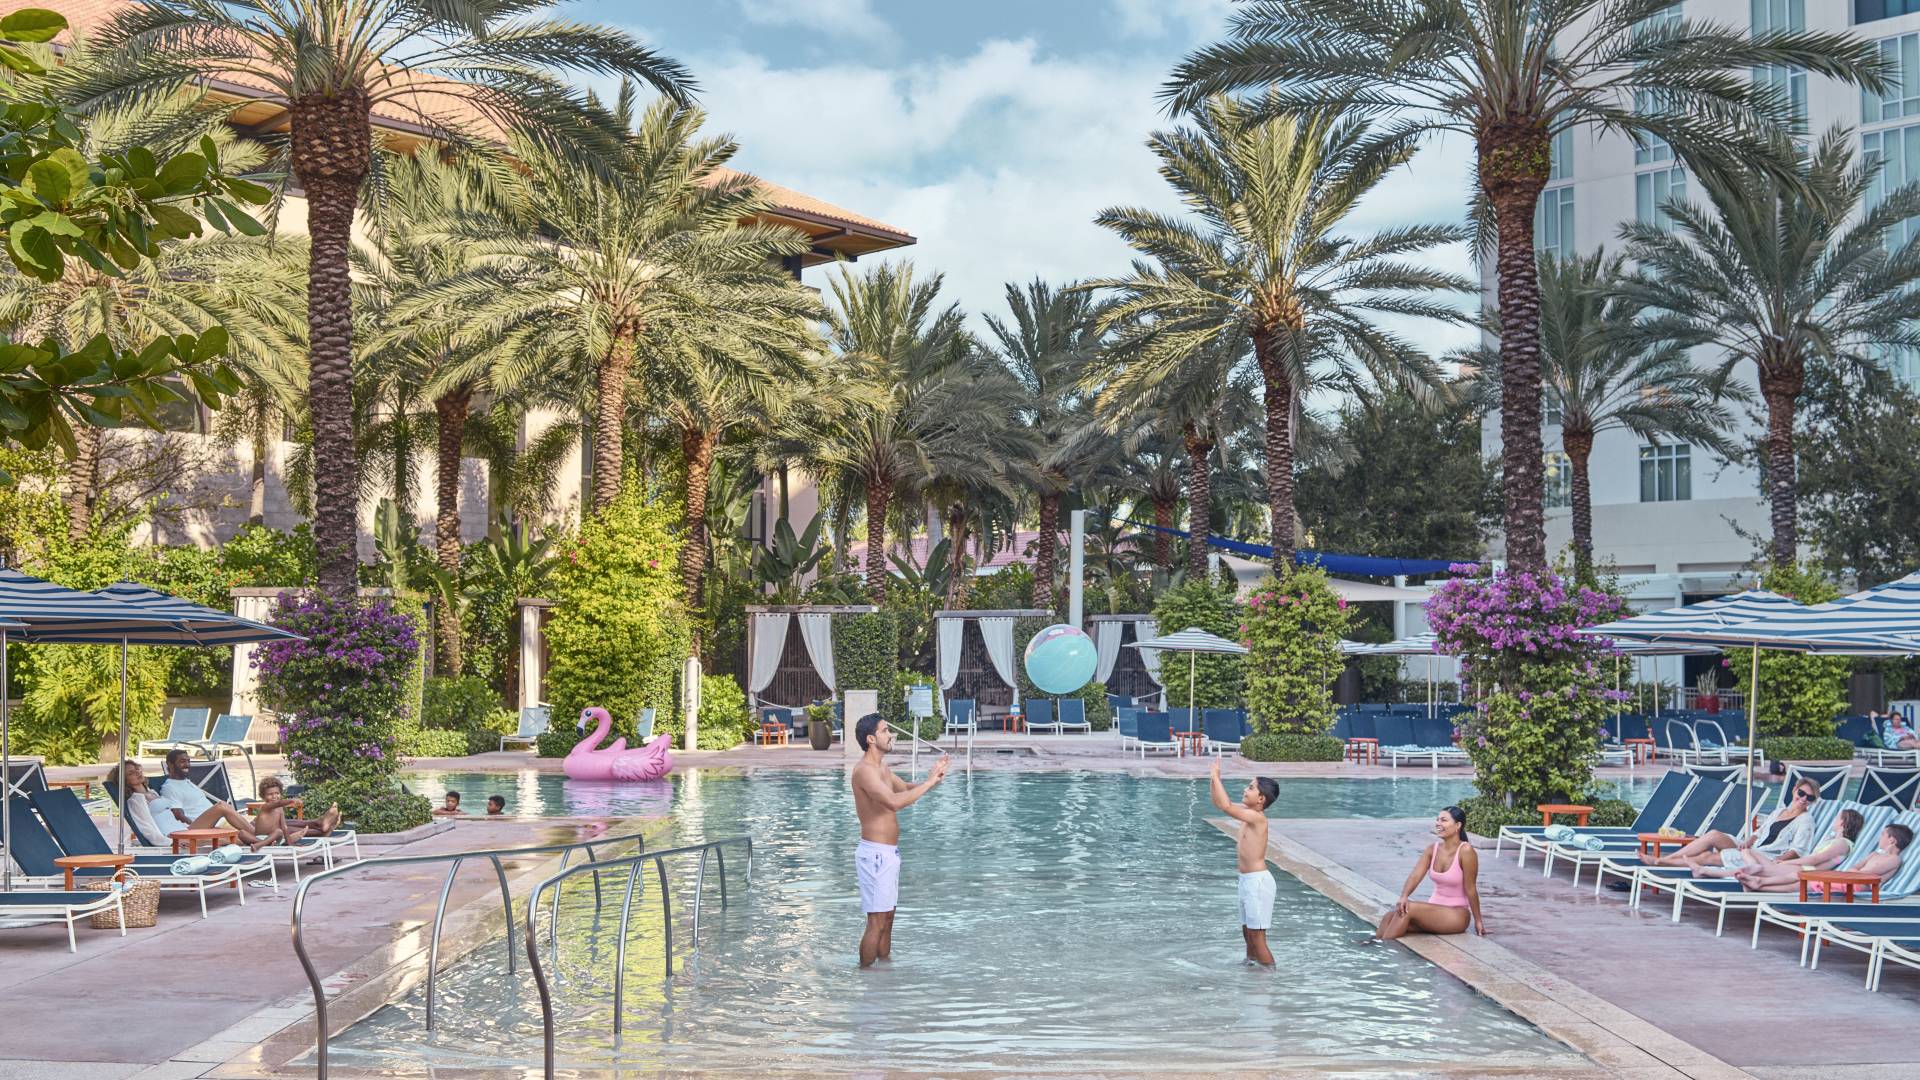 People Playing and Enjoying an Outdoor Pool Area with Lounge Chairs and Palm Trees